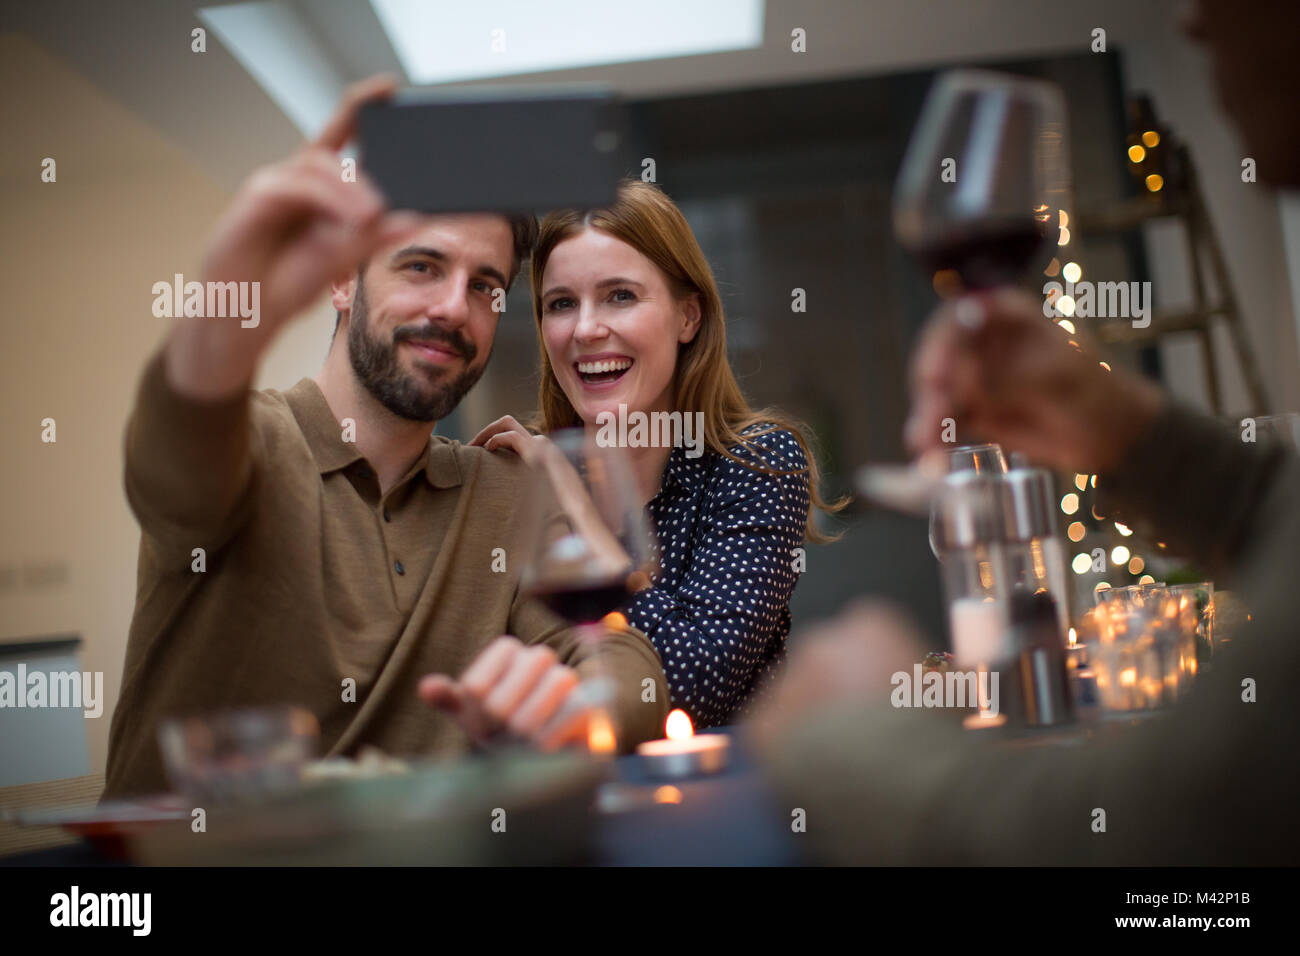 Couple taking a selfie at a celebration Stock Photo